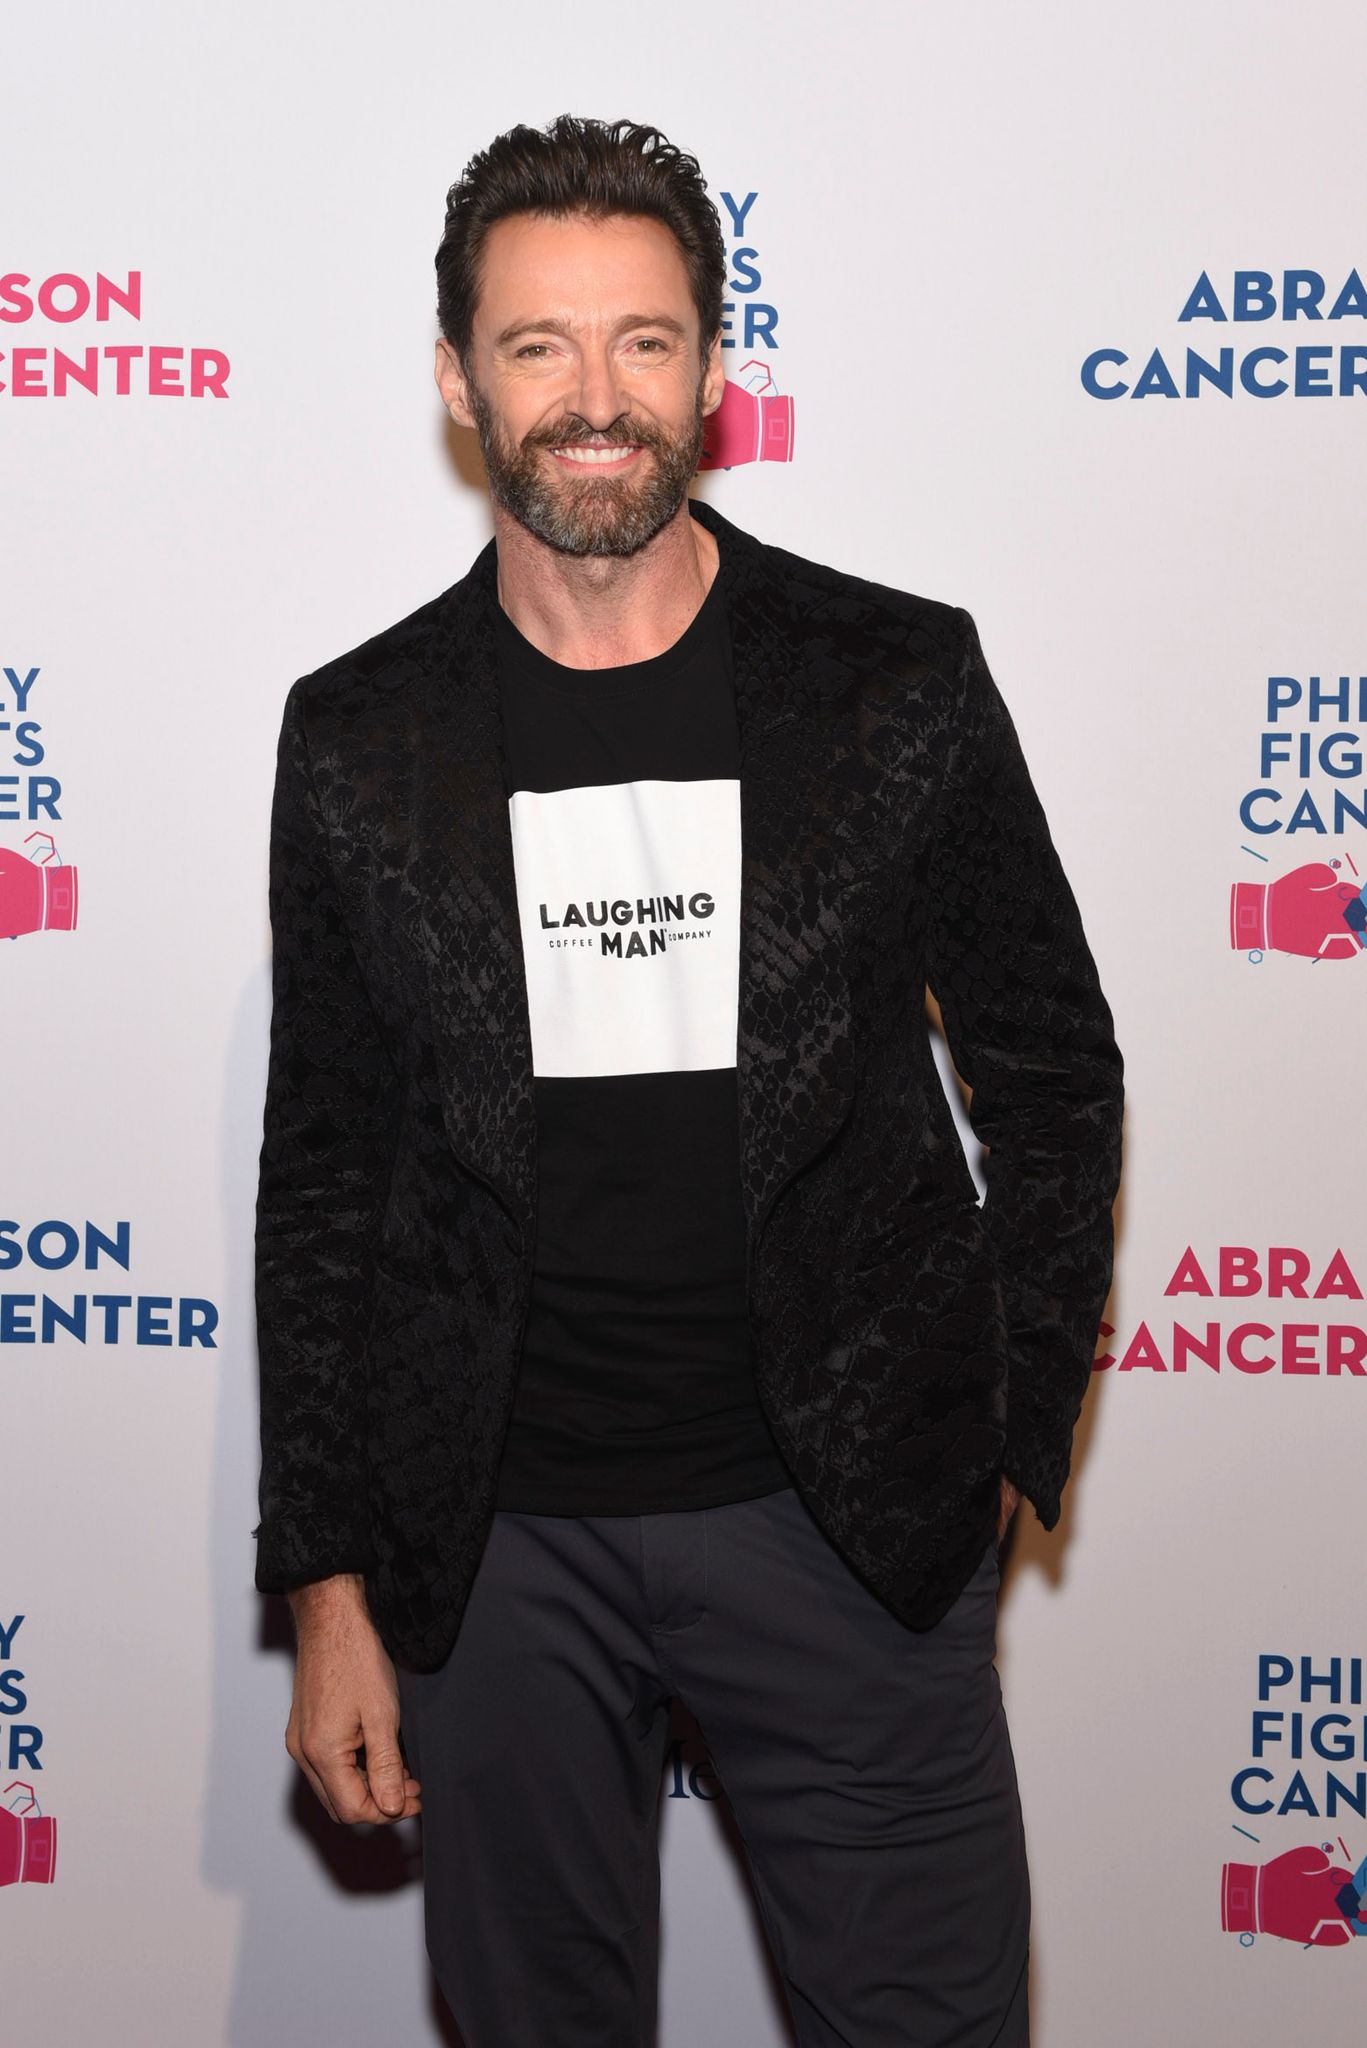 Hugh Jackman at the Philly Fights Cancer: Round 5 Event benefiting Penn Medicine's Abramson Cancer Center at the Philadelphia Navy Yard on October 26, 2019 in Philadelphia, Pennsylvania | Photo: Getty Images